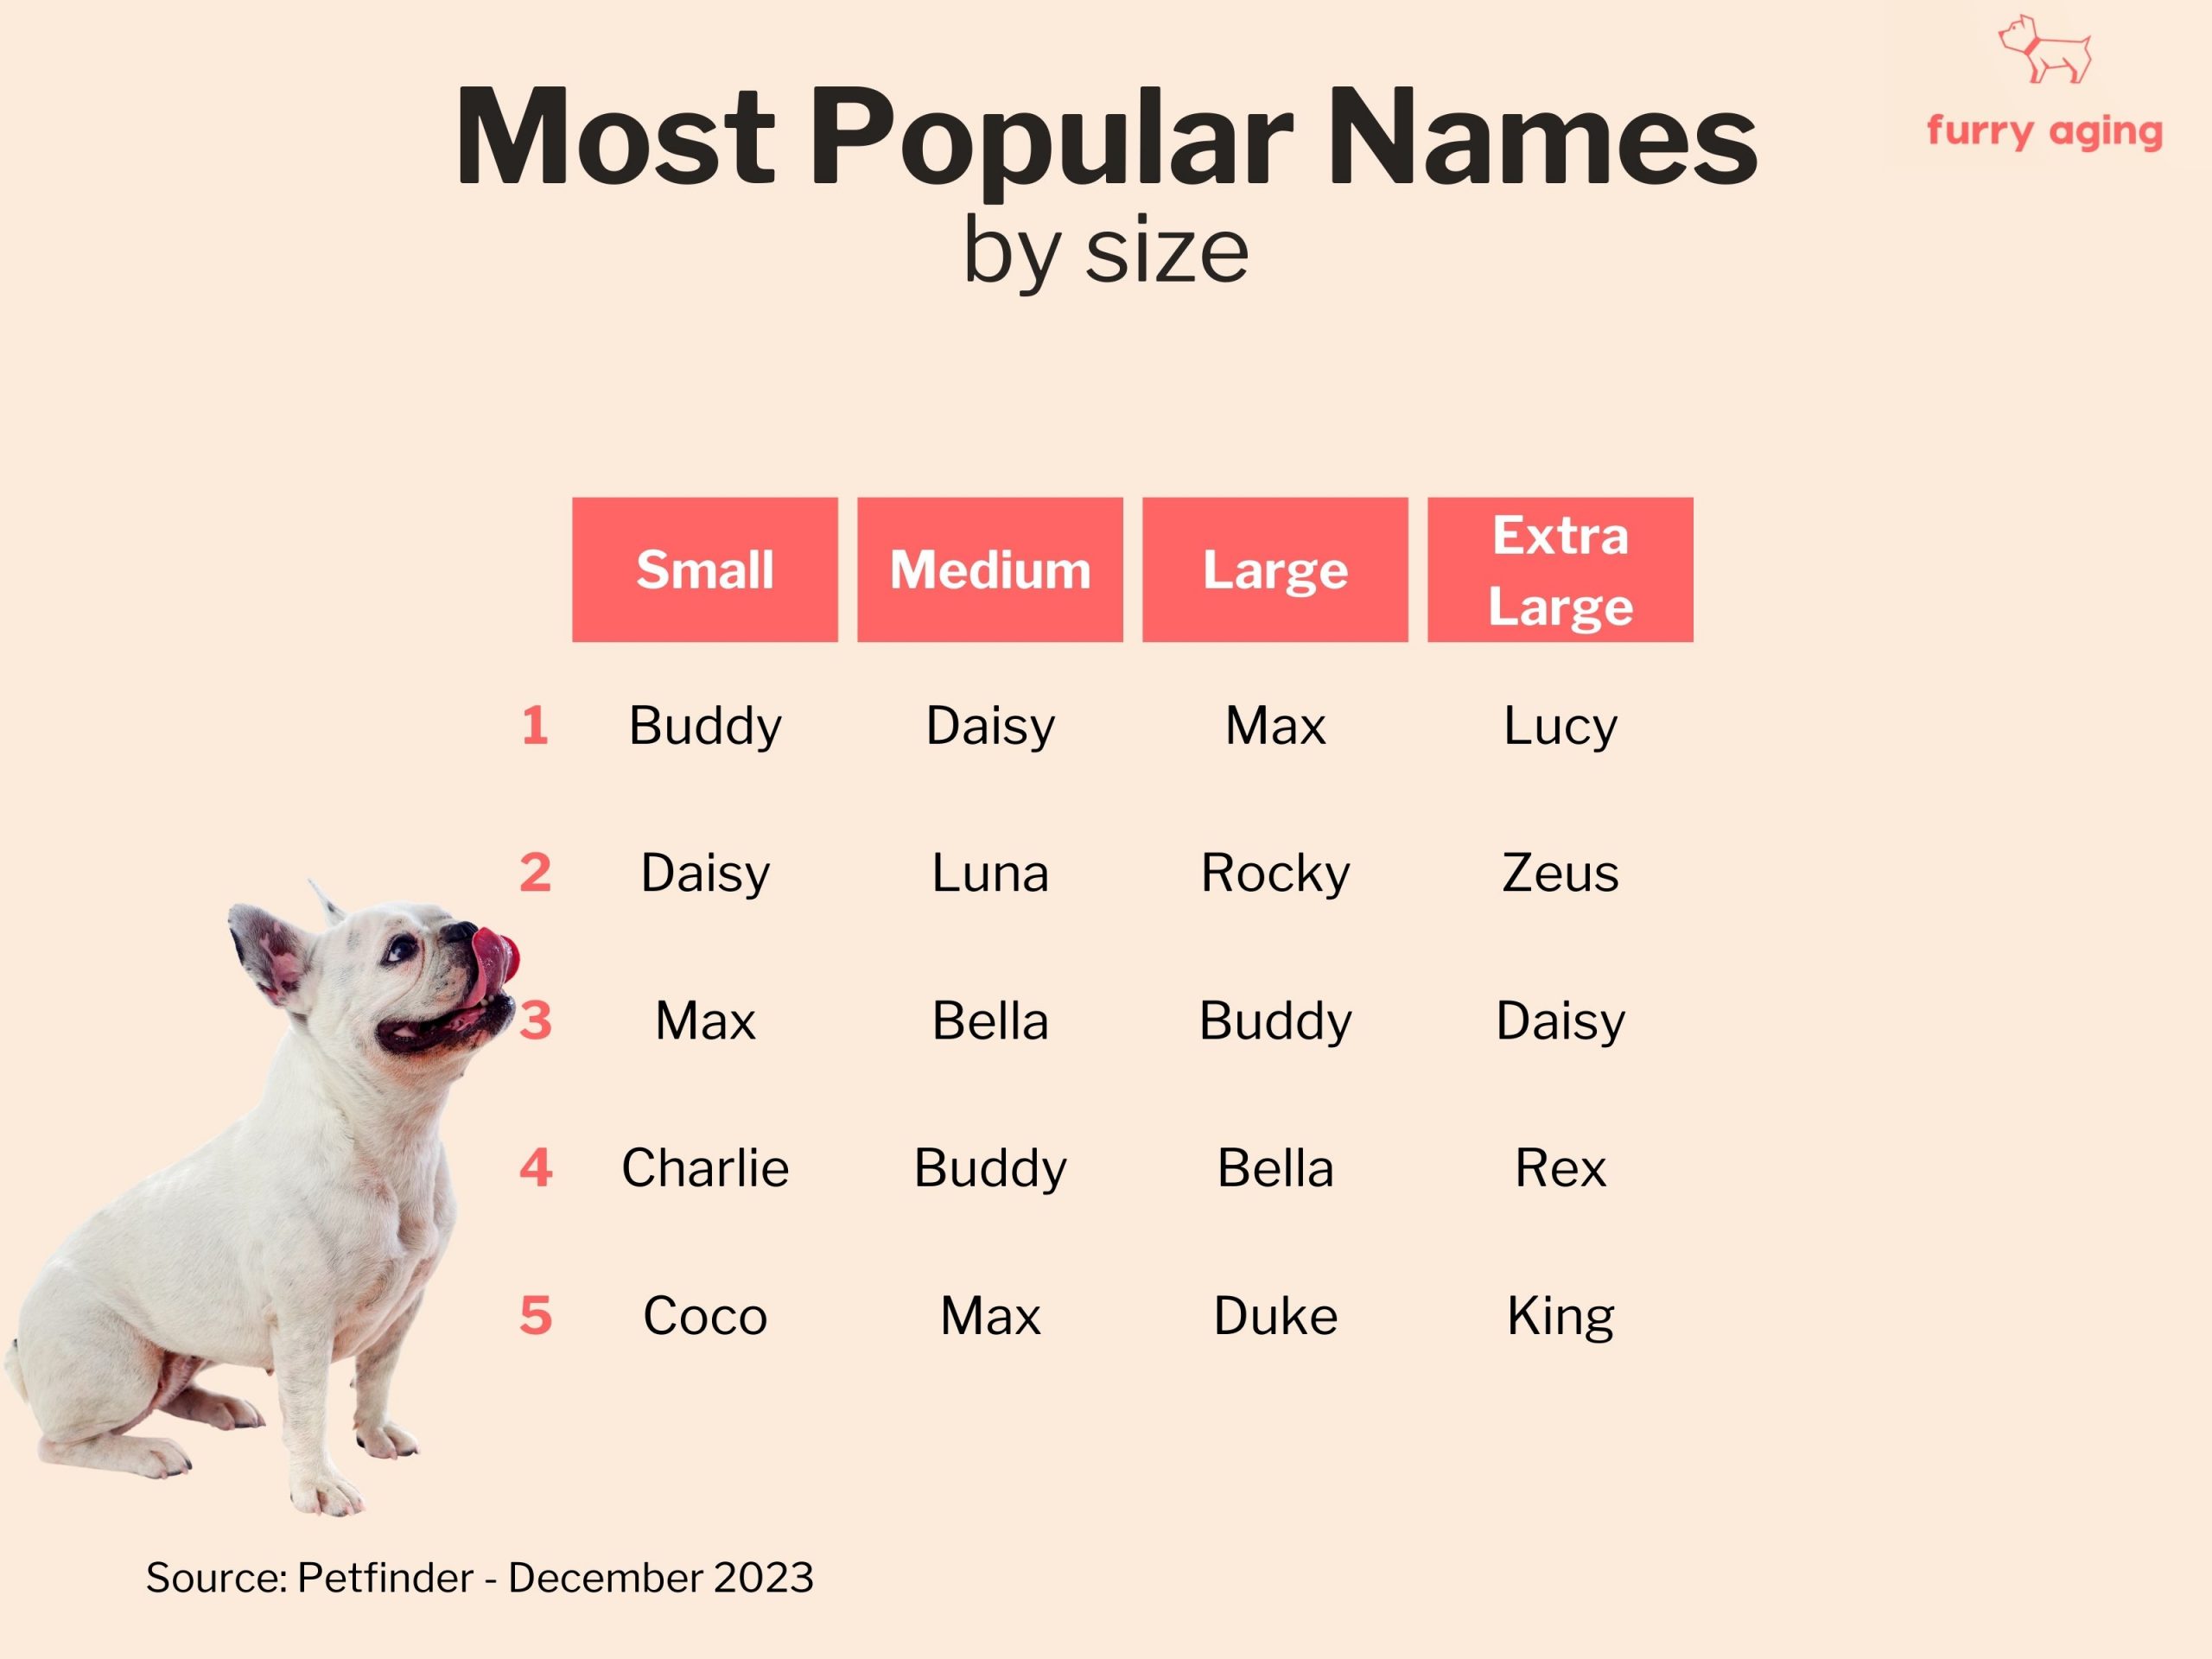 Most popular names by size